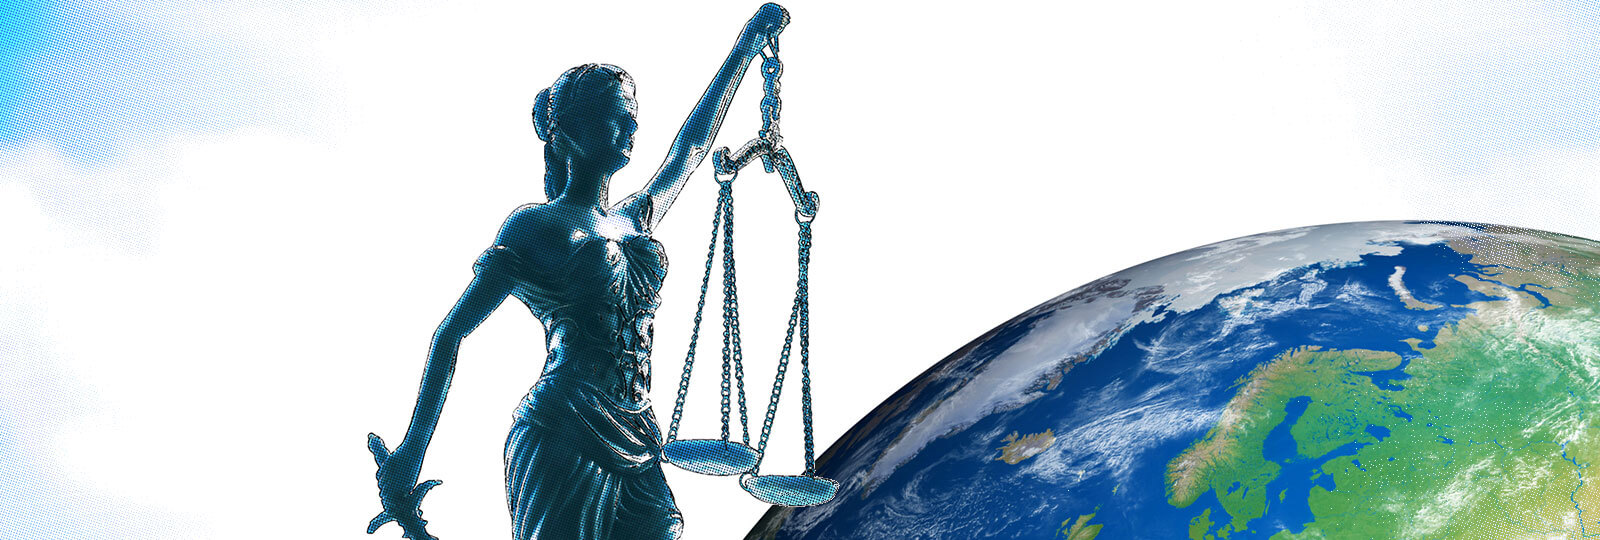 A photo of a statue holding the scales of justice and part of the Earth is visible.